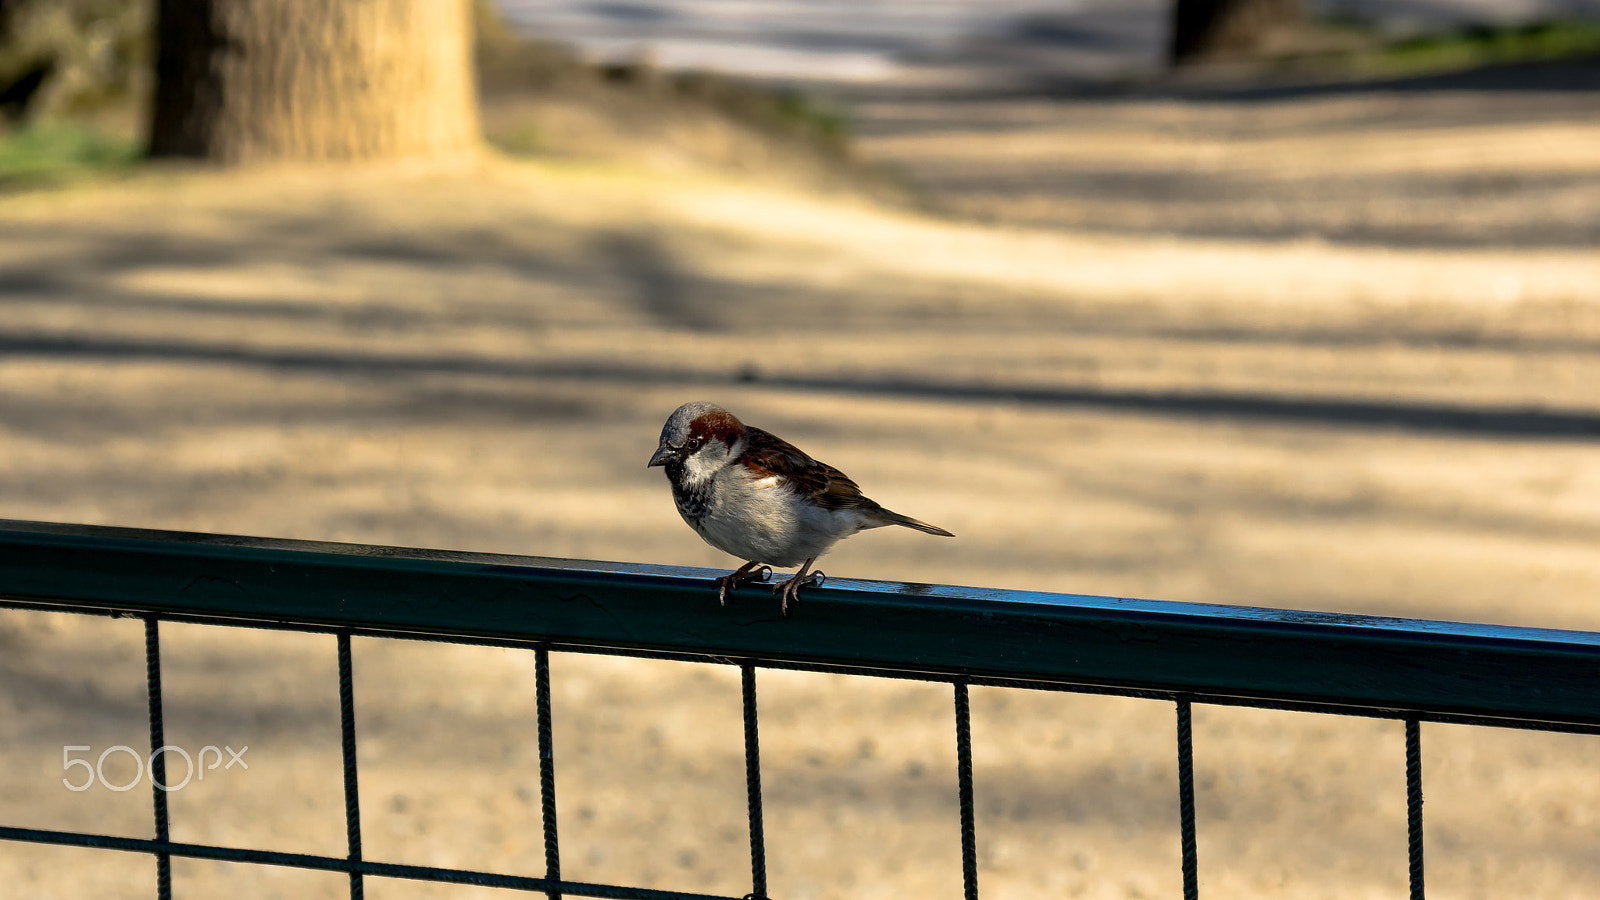 Pentax K-3 sample photo. A sparrow sitting on a fence photography